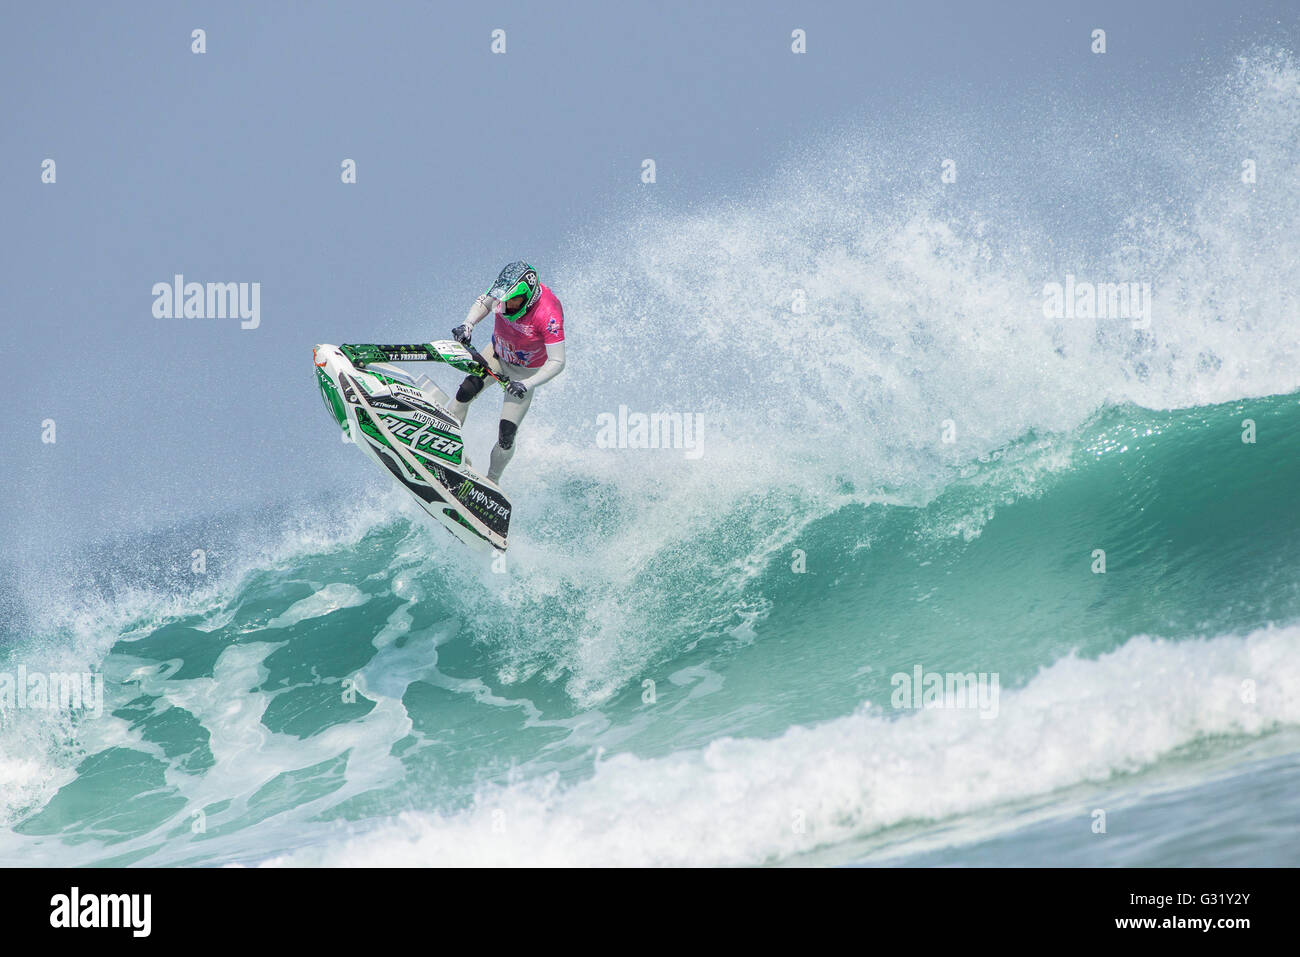 Fistral, Newquay, Cornwall. 6th June, 2016.  Abraham Hochstrasse from Germany performs a spectacular stunt on his Jet-ski at the IFWA World Freeride Championships.  Photographer: Gordon Scammell/Alamy Live News. Stock Photo